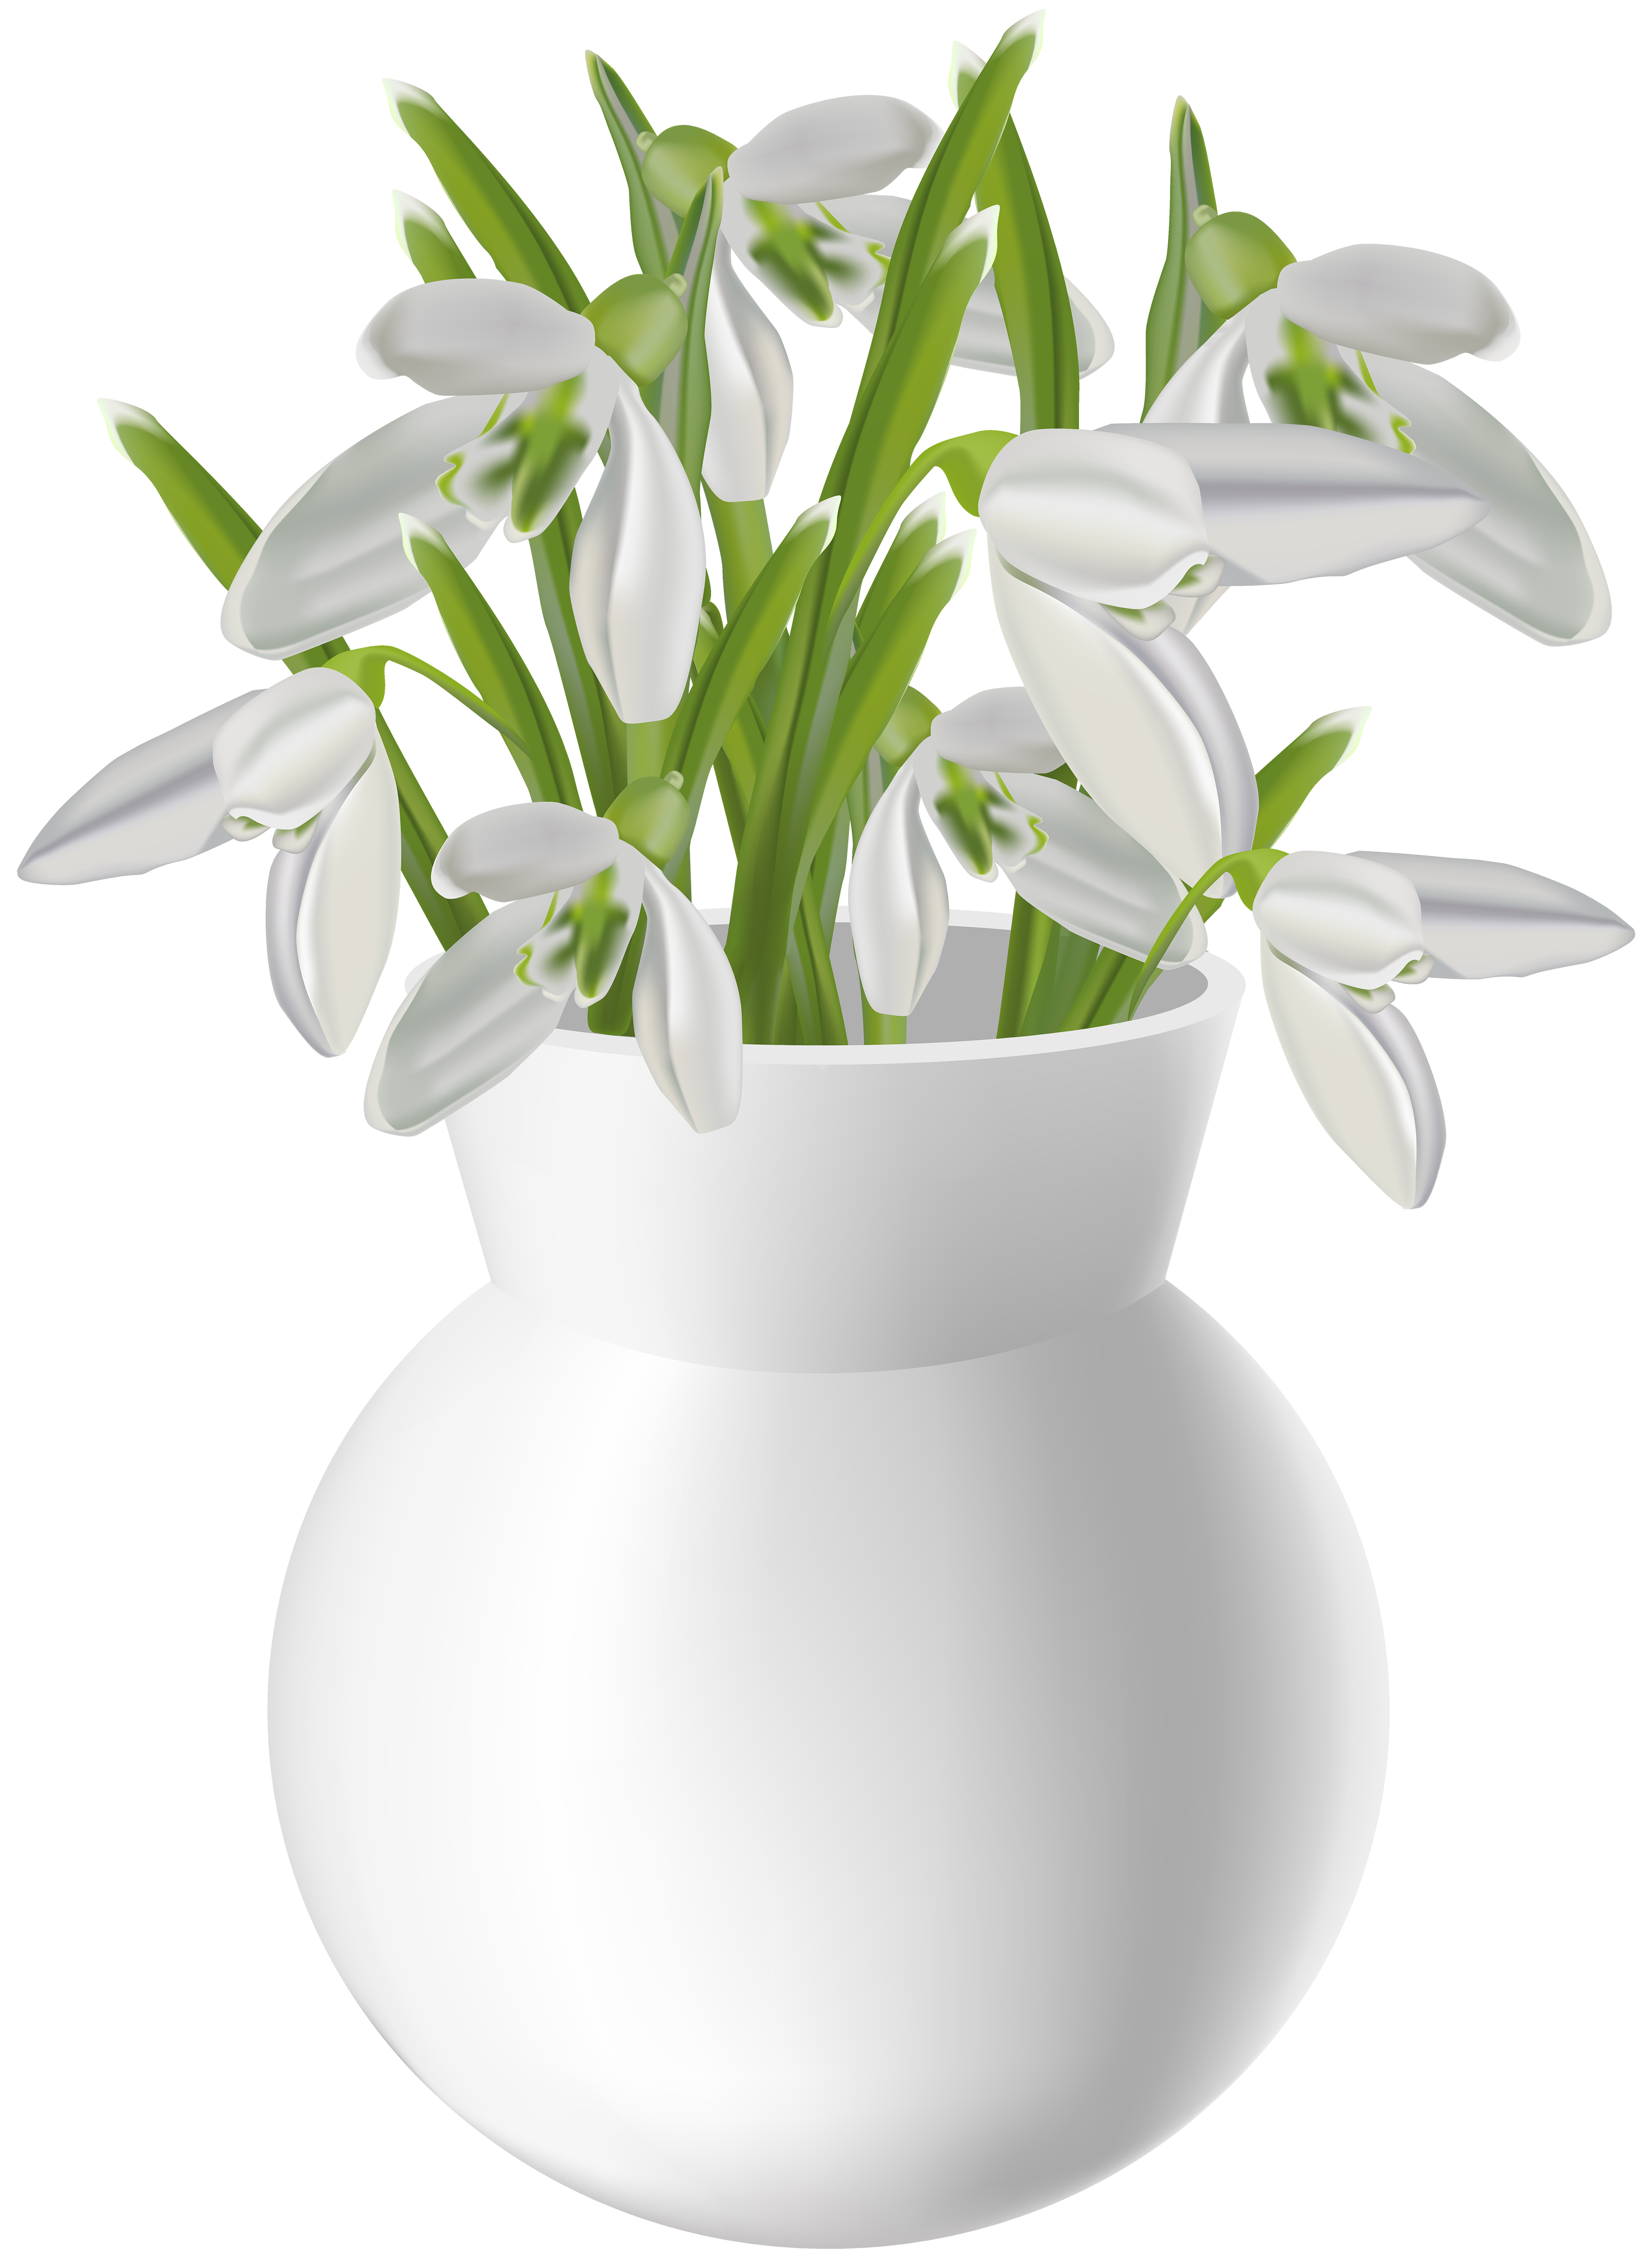 Vase with Snowdrops Transparent PNG Clip Art Image​ | Gallery Yopriceville  - High-Quality Free Images and Transparent PNG Clipart